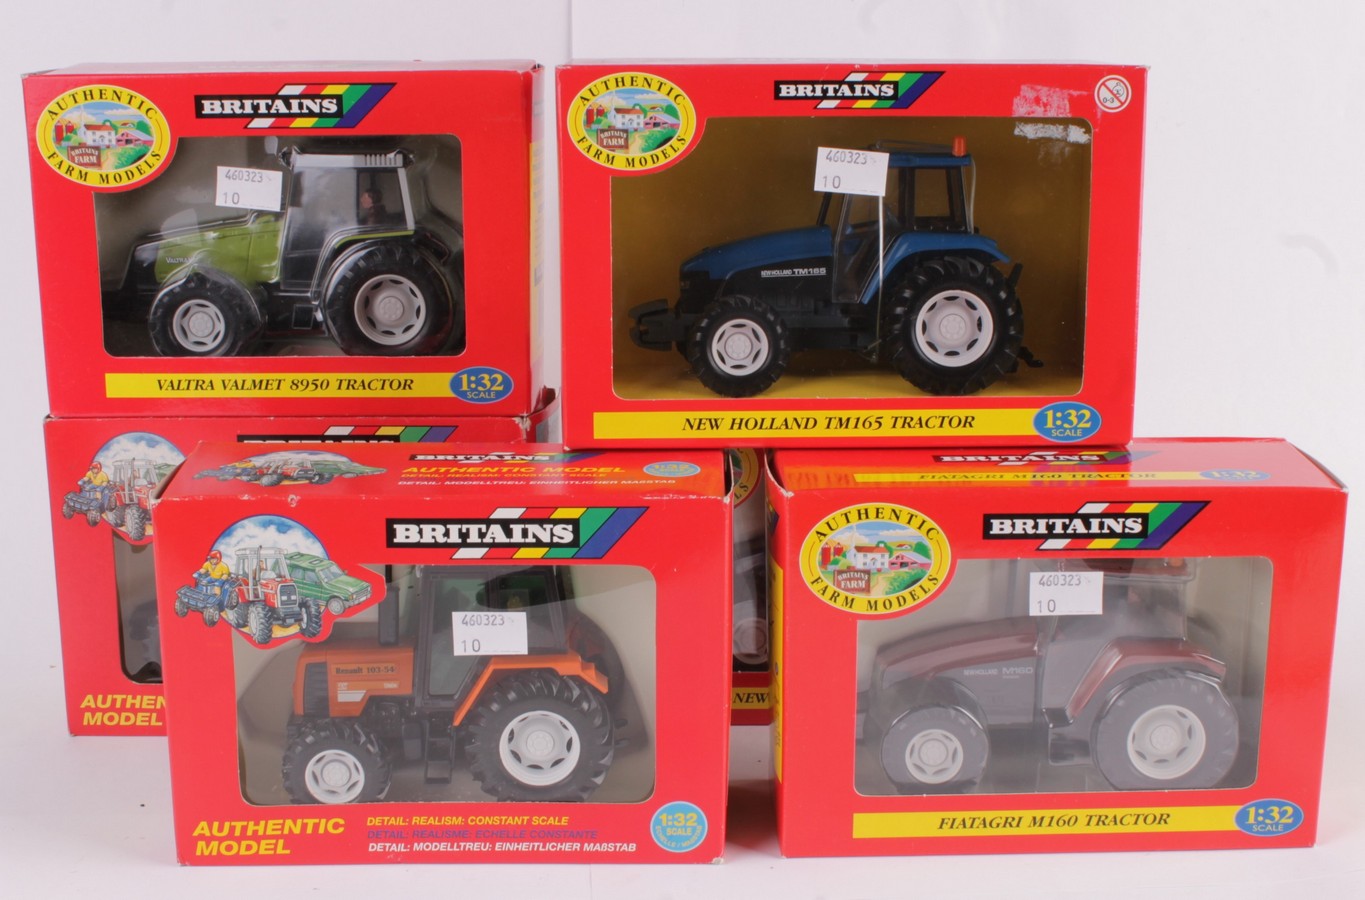 Six Britains 1:32 scale tractors, comprising serial numbers: 40522, 9490, 9497, 9488, 9493 and